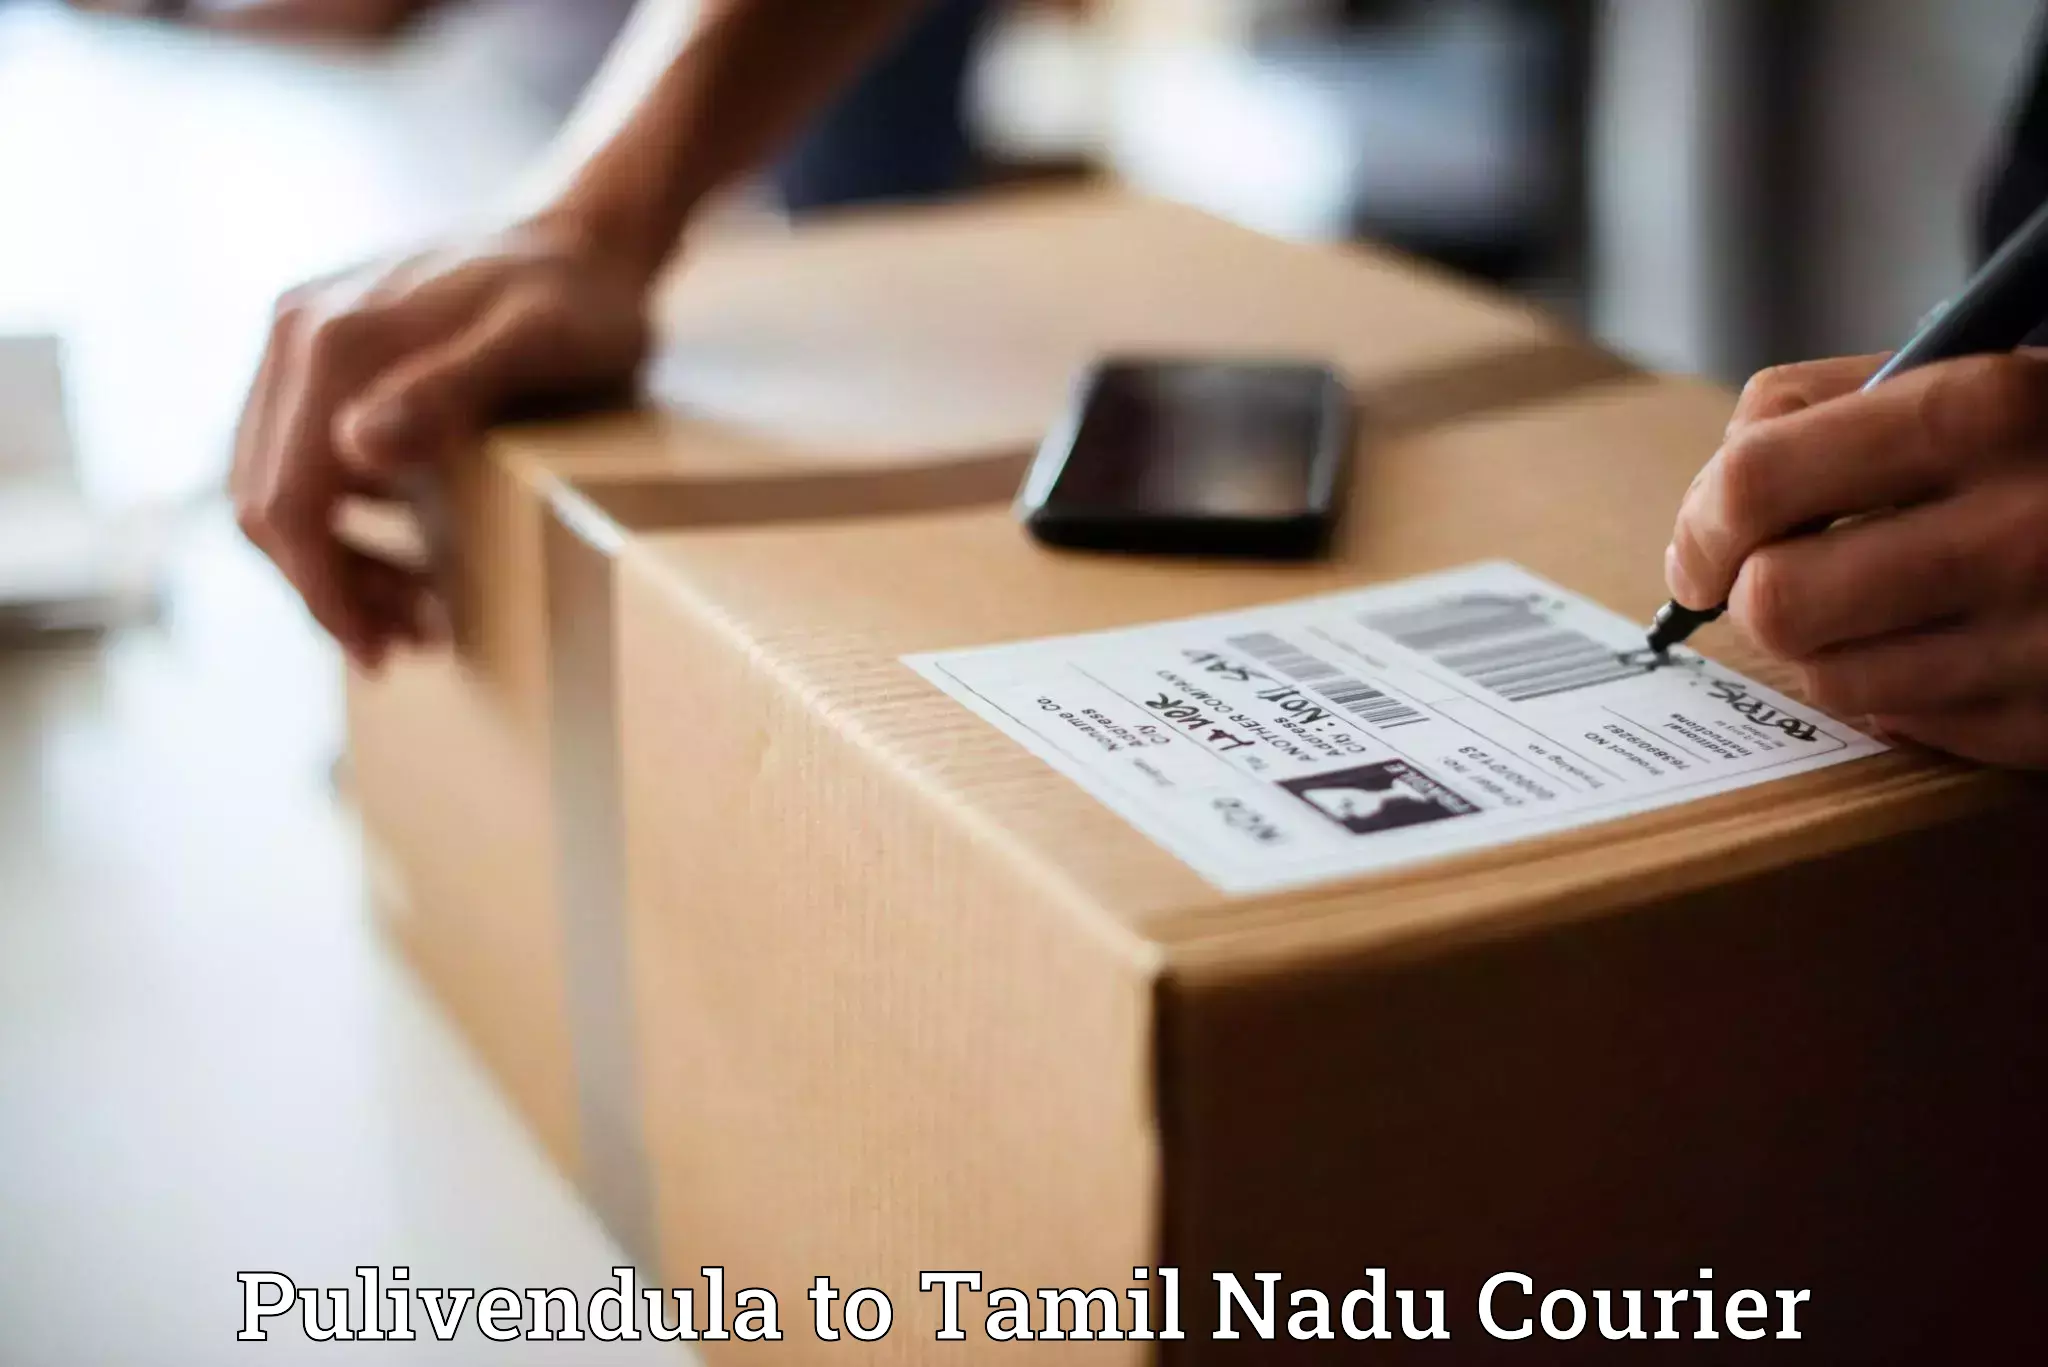 Versatile courier offerings Pulivendula to Chennai Port